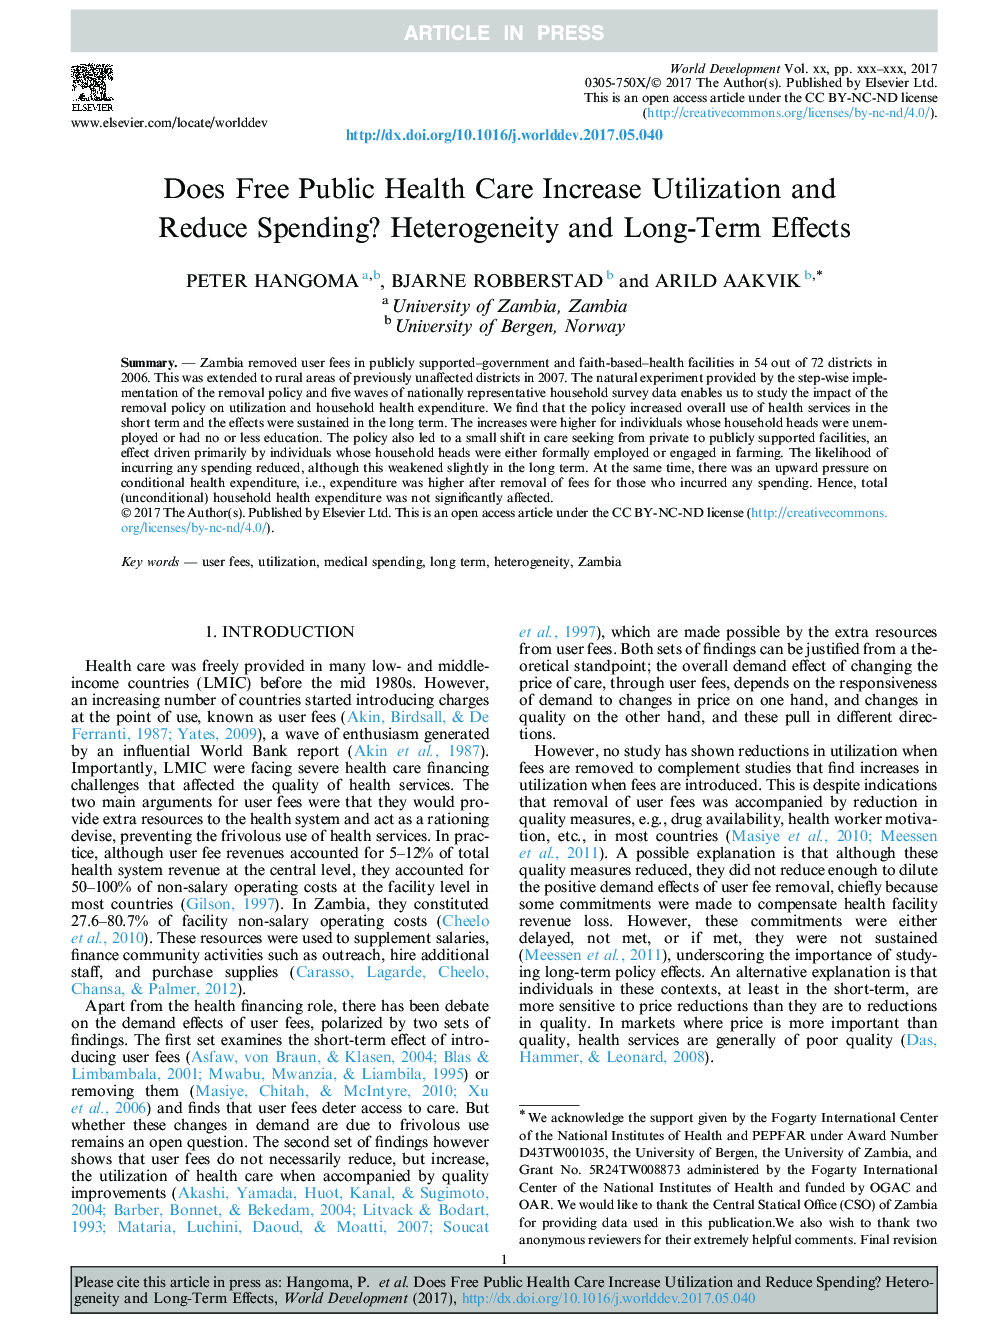 Does Free Public Health Care Increase Utilization and Reduce Spending? Heterogeneity and Long-Term Effects